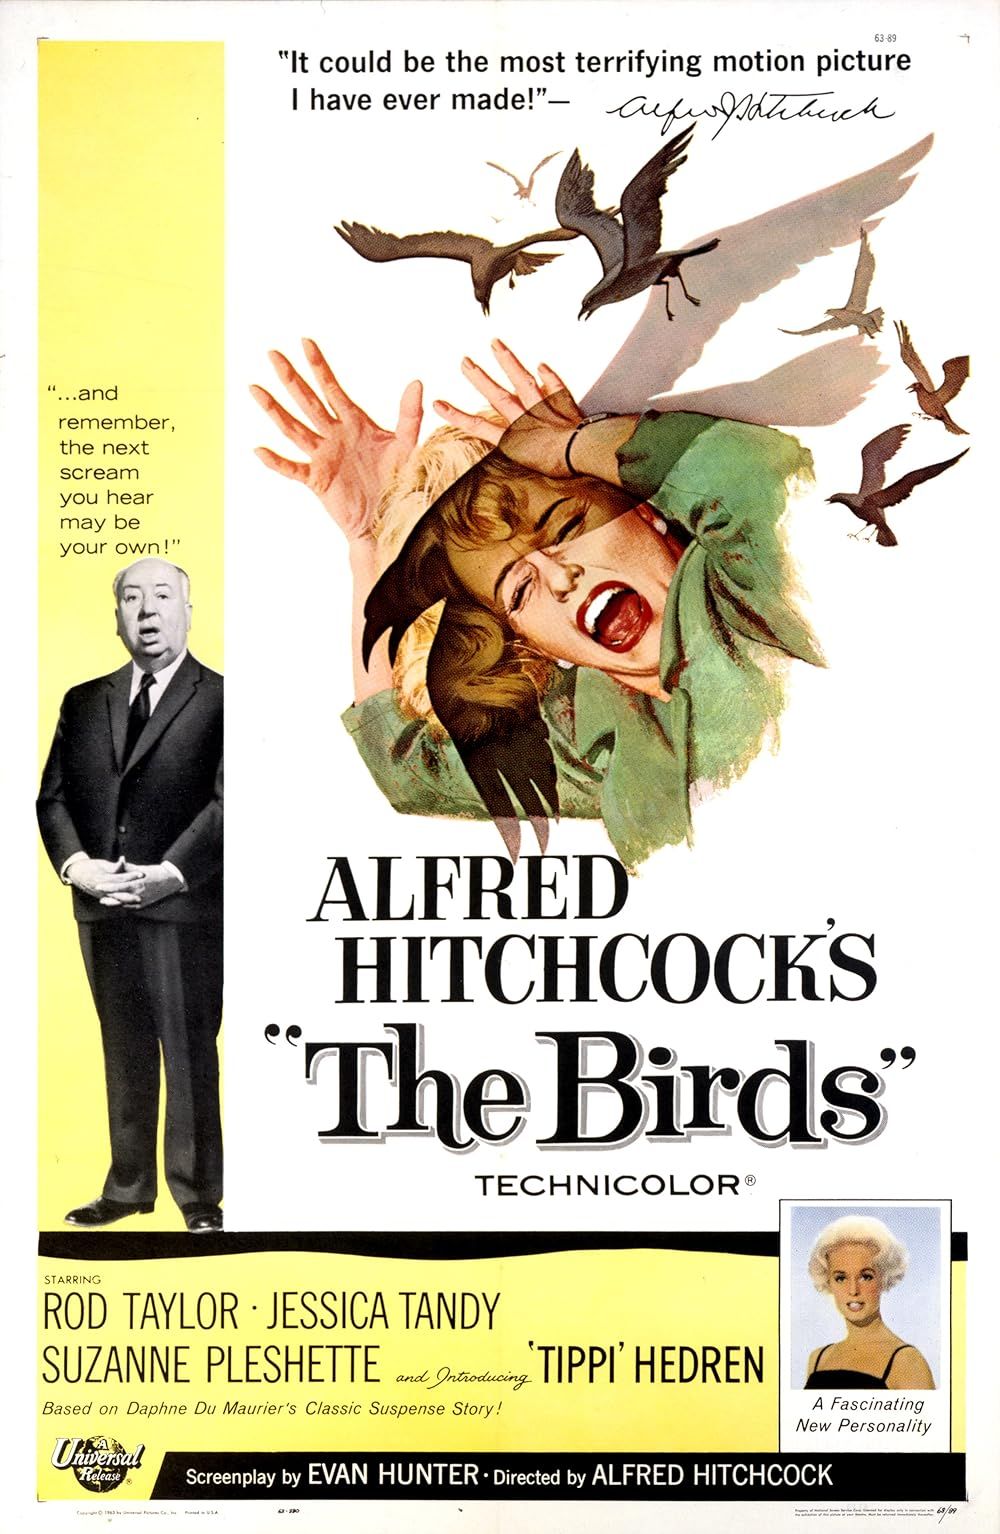 Poster of The Birds by Hitchcock with the director and a woman being attacked by birds